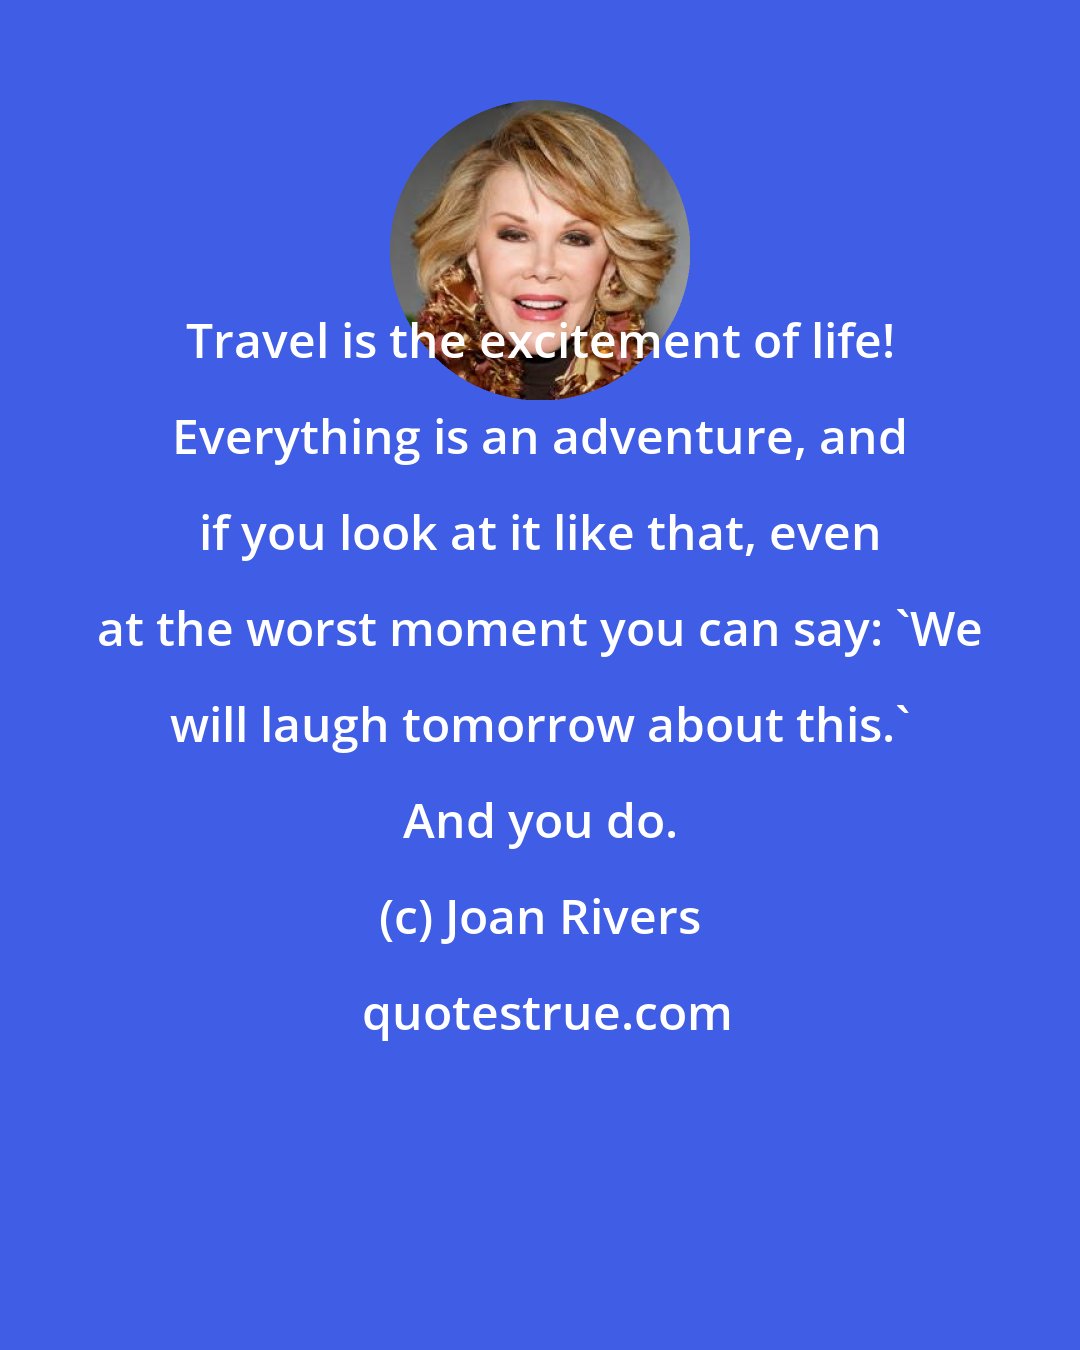 Joan Rivers: Travel is the excitement of life! Everything is an adventure, and if you look at it like that, even at the worst moment you can say: 'We will laugh tomorrow about this.' And you do.